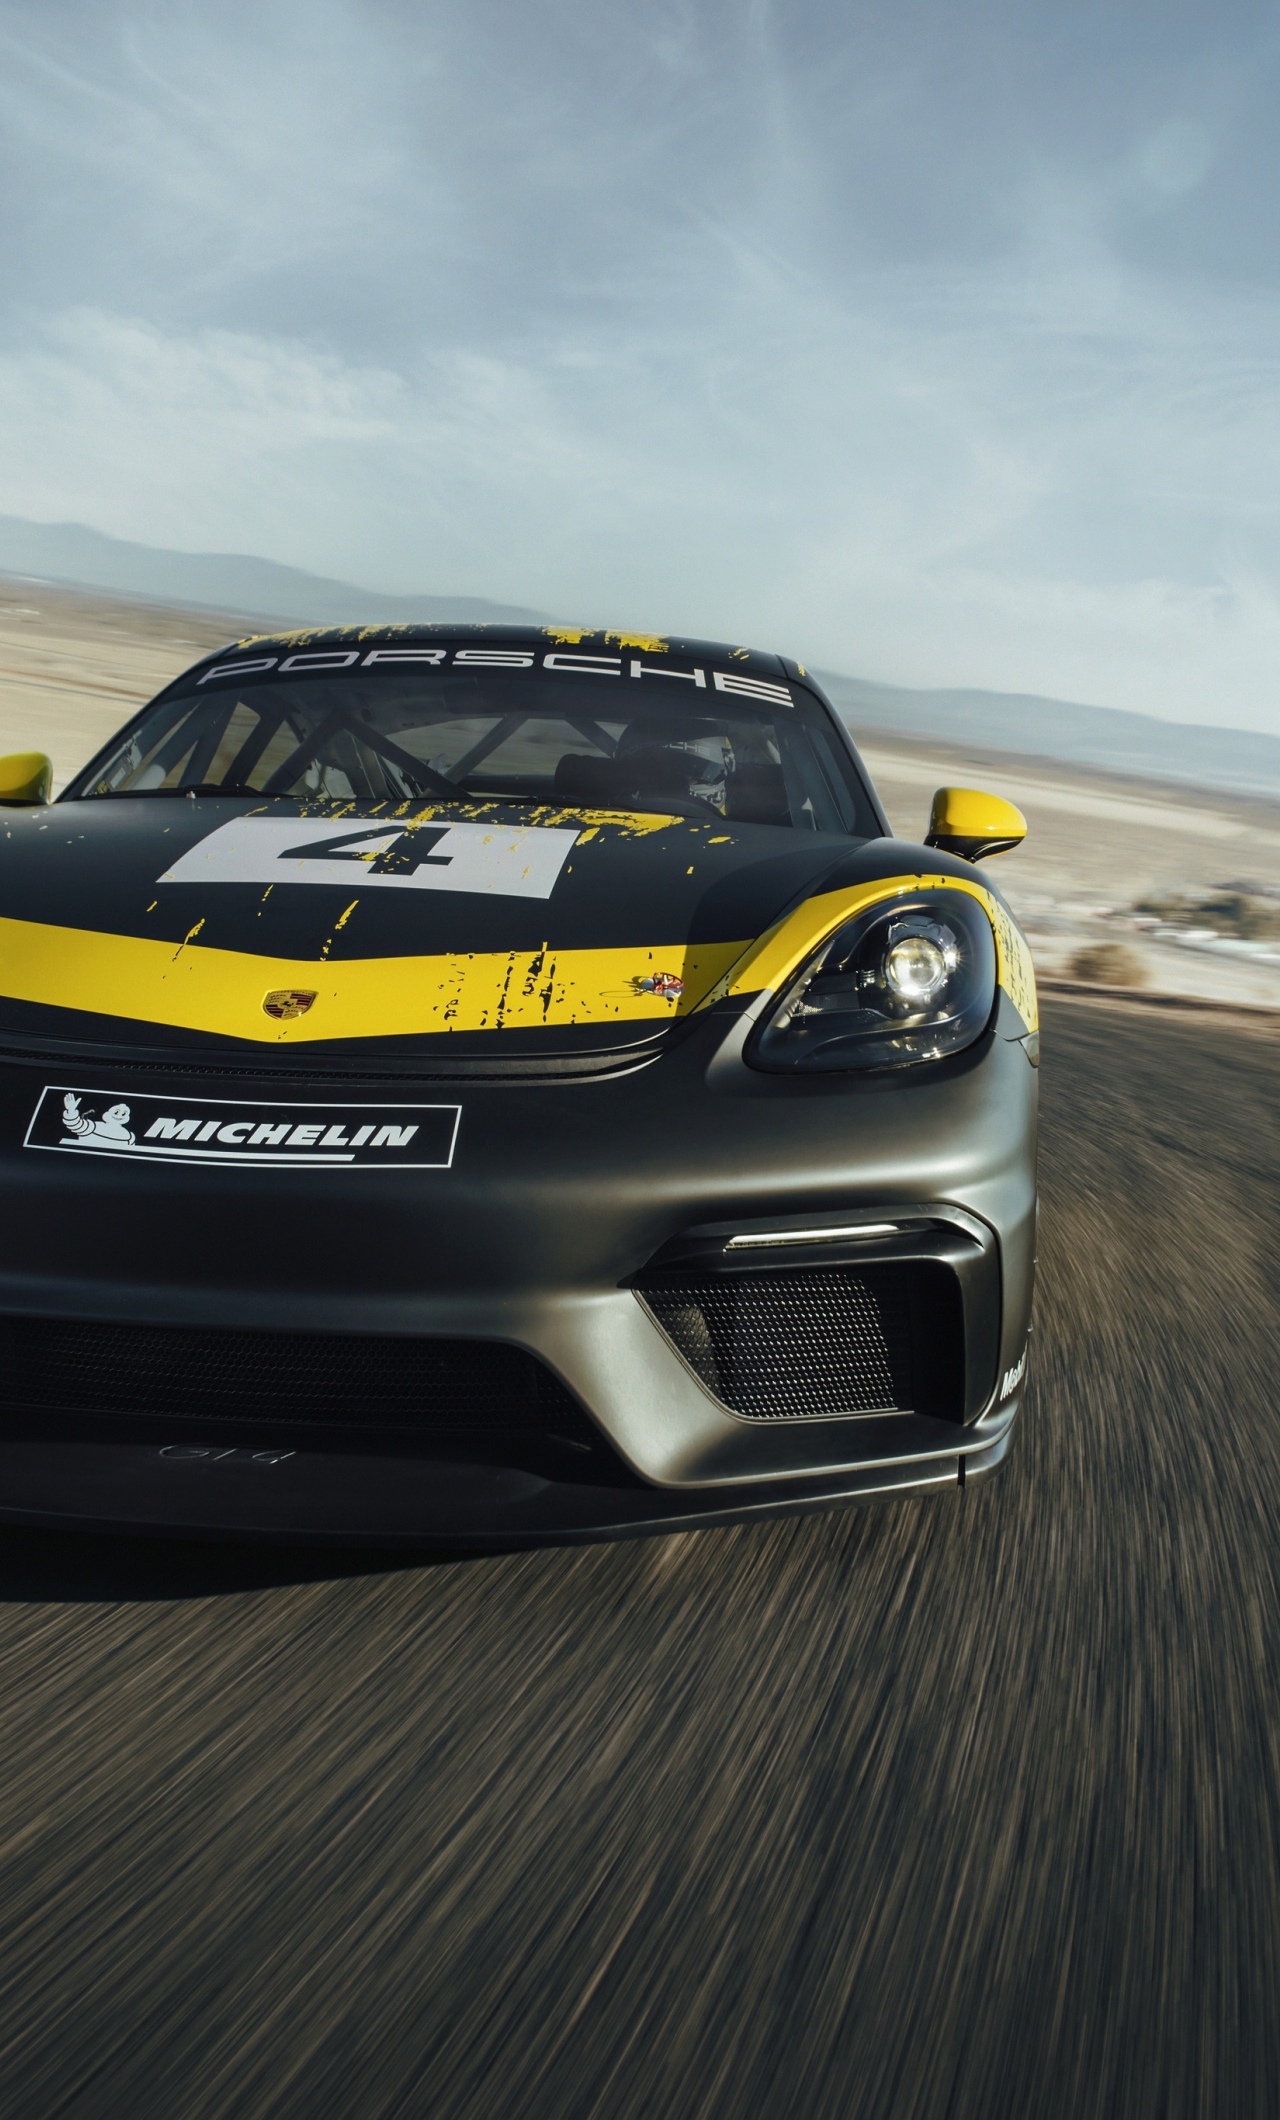 Porsche - The new 718 Cayman GT4 RS gears up for its... | Facebook